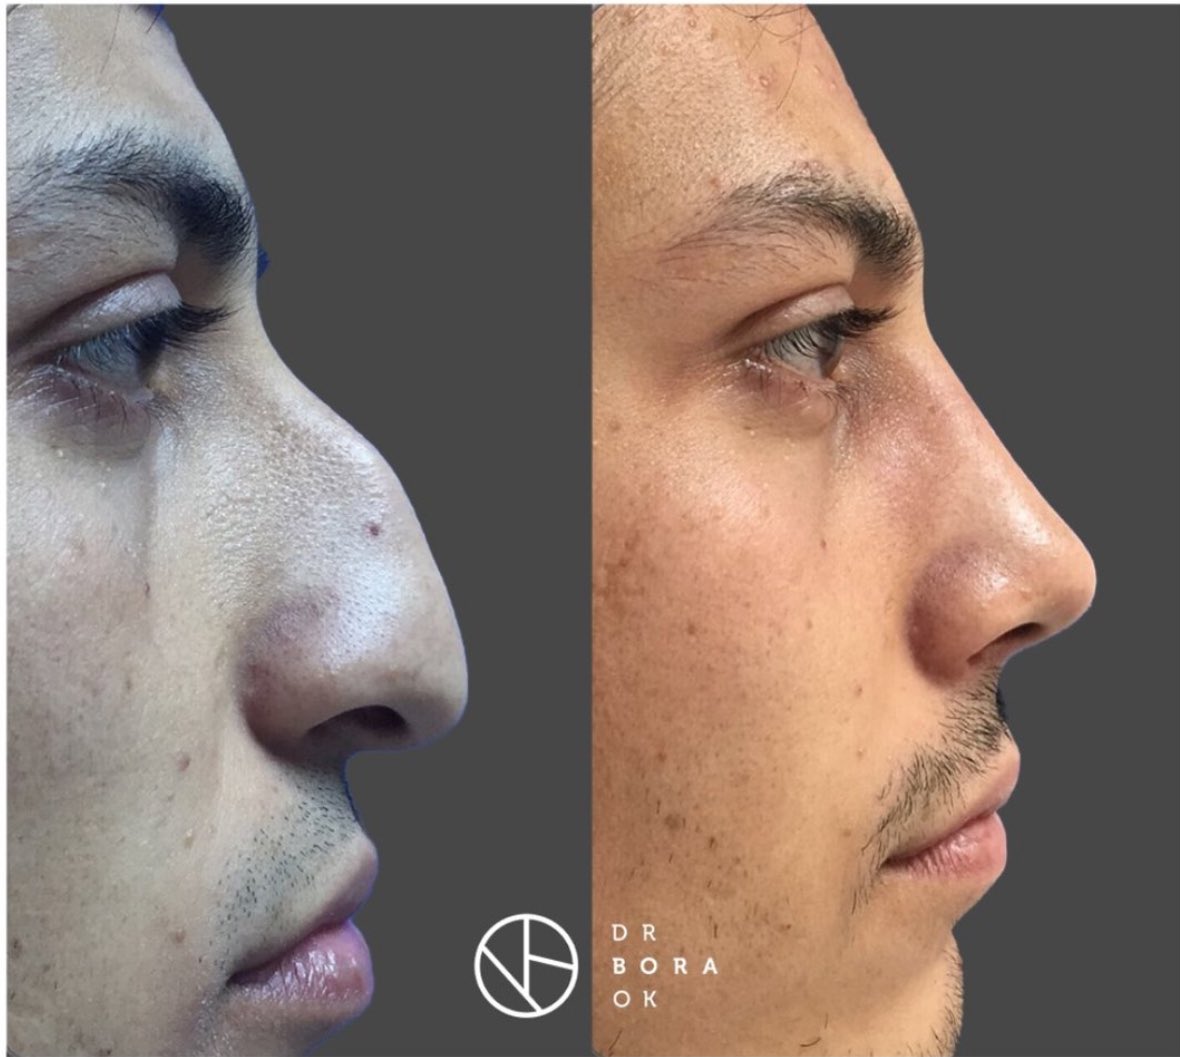 Unlocking a new level of confidence with this rhinoplasty. 👃🏼✨

Rate this transformation!